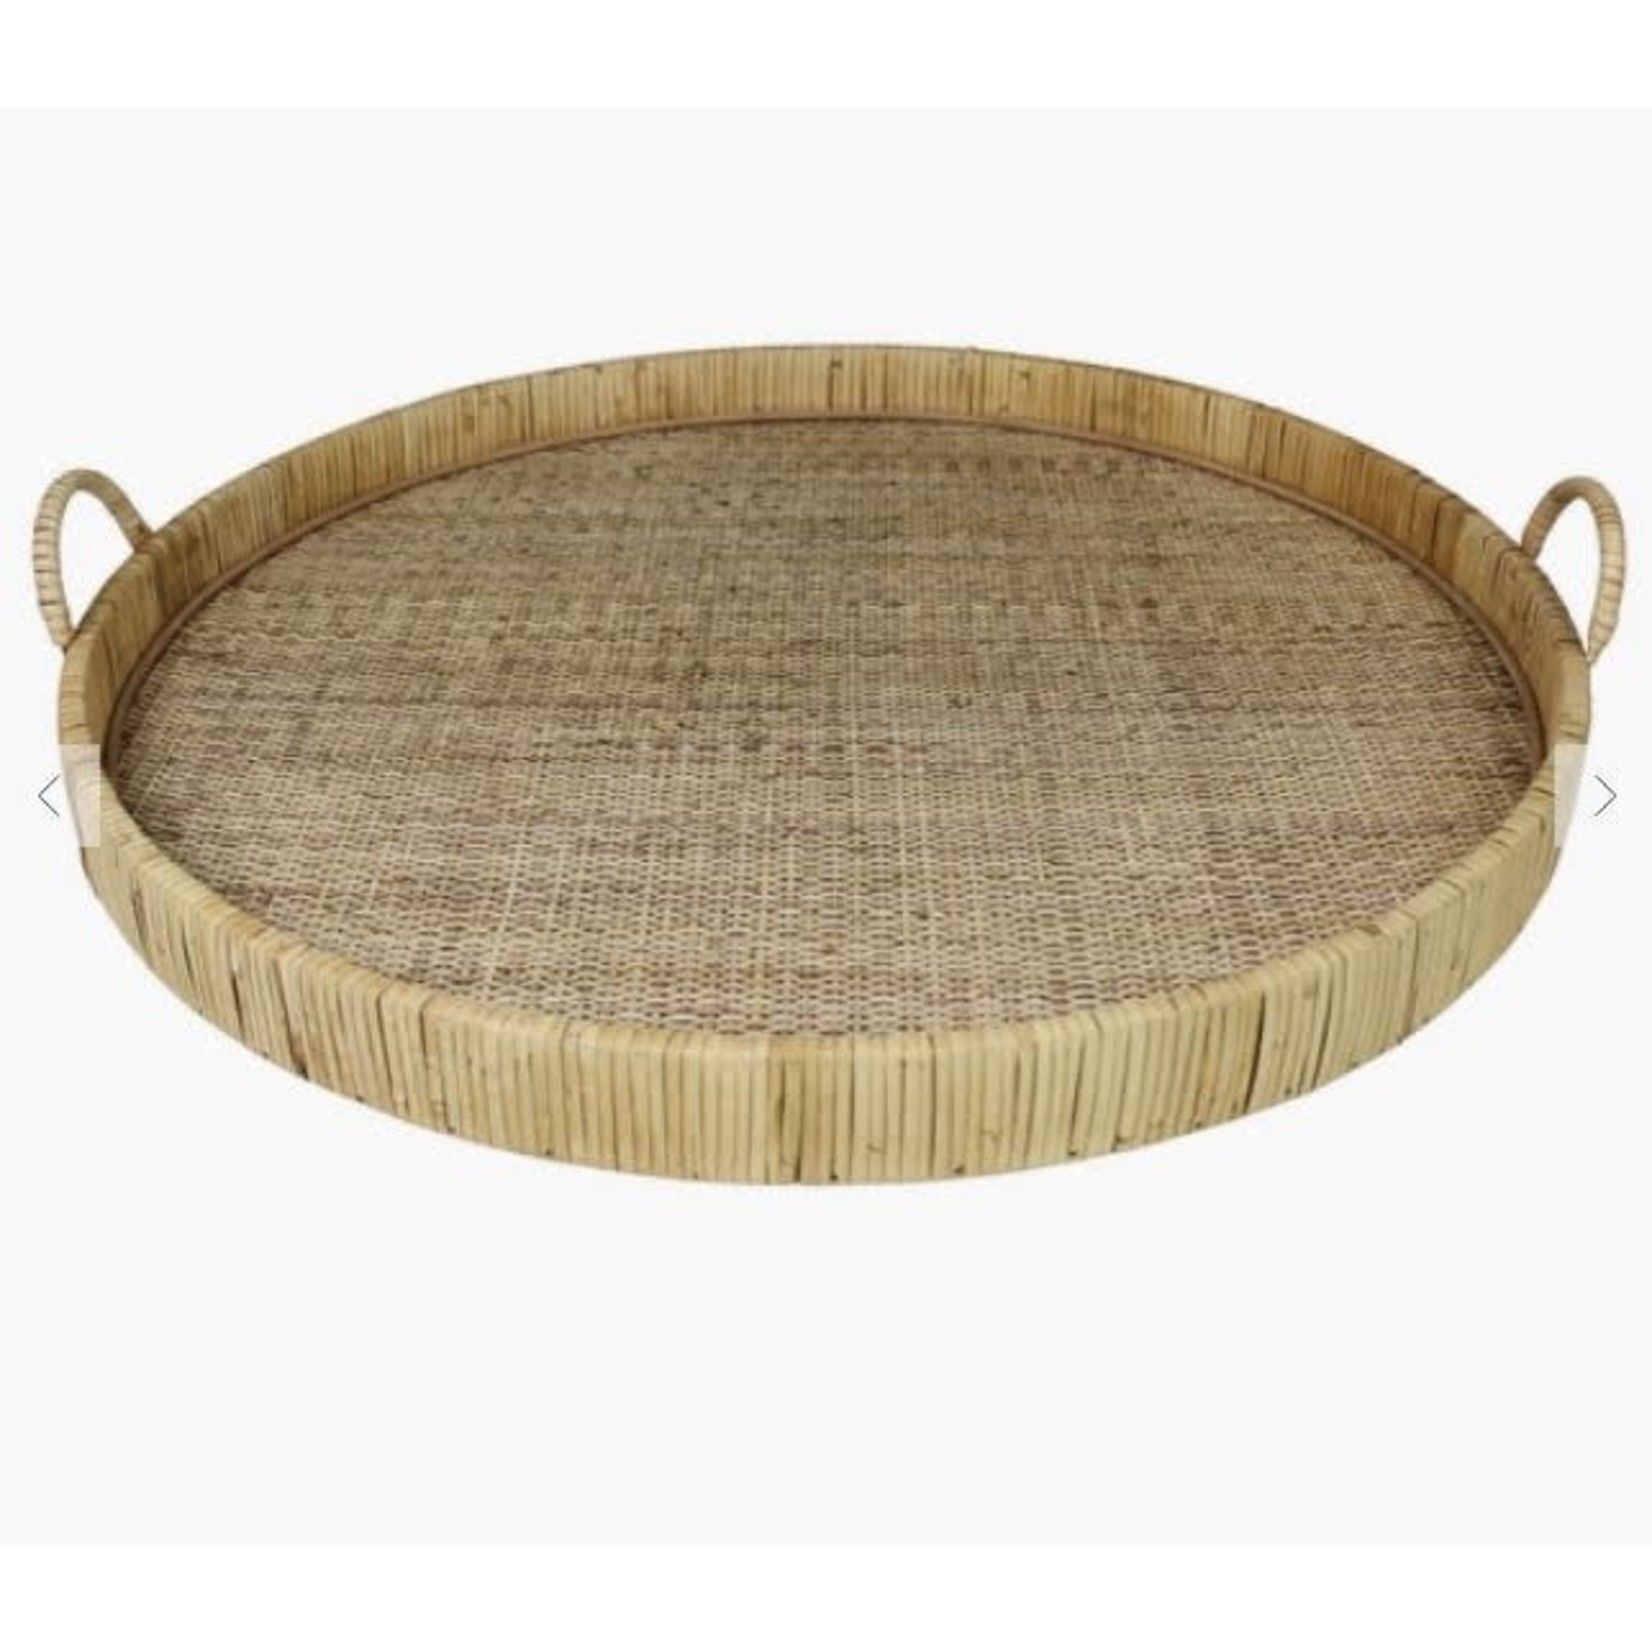 Mickler & Co. Rattan Round Woven Tray